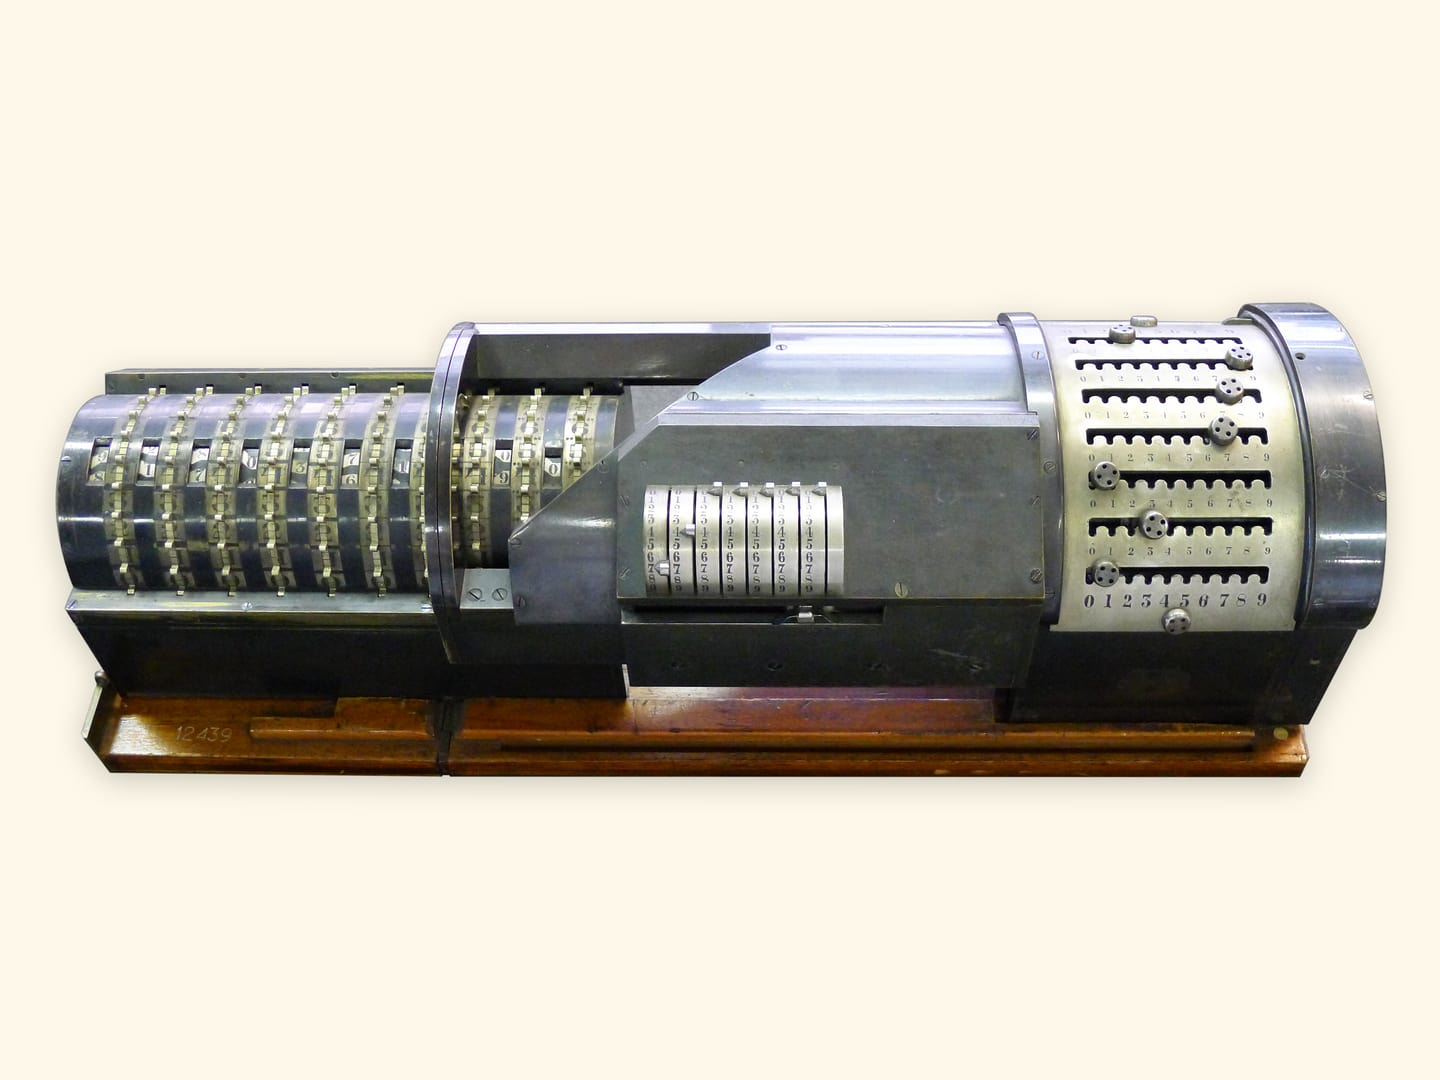 Mechanisms by P. L. Tchebyshev — Arithmometer. Second model with the multiplying attachment — Second model of the arithmometer and the attachment